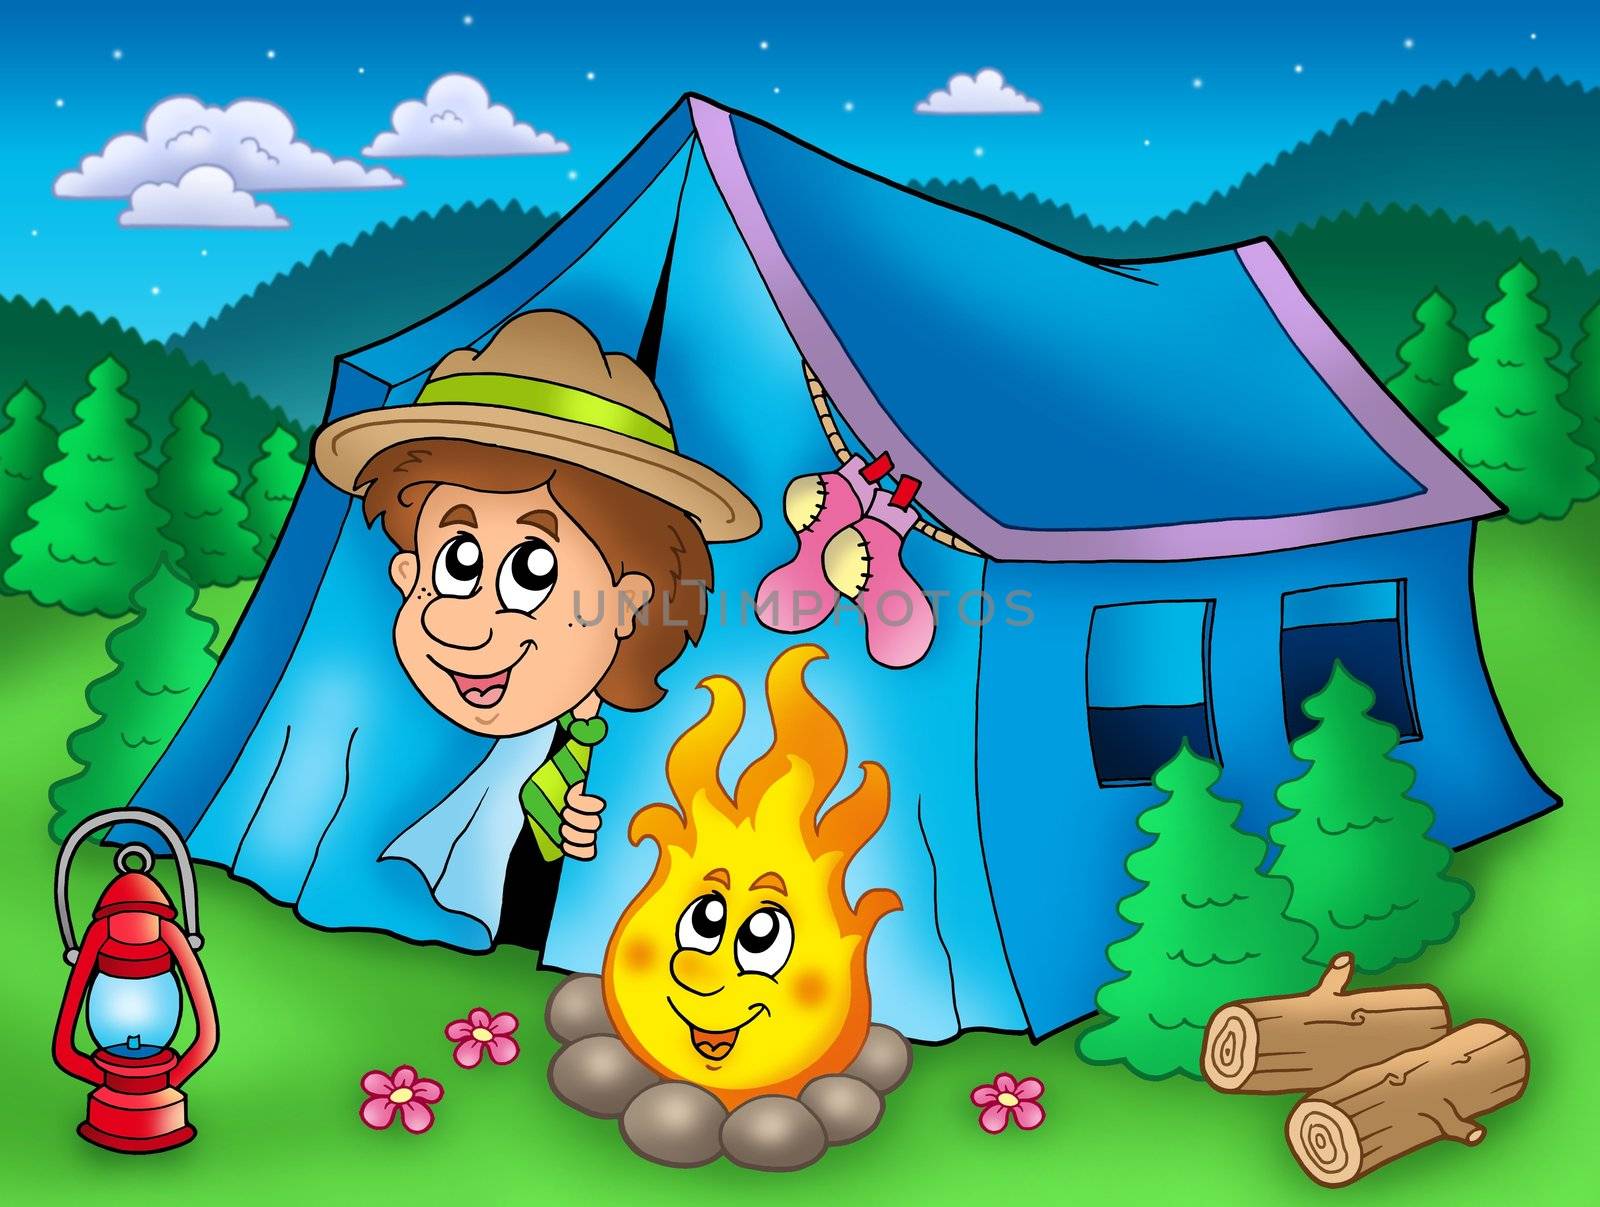 Cartoon scout boy in tent - color illustration.